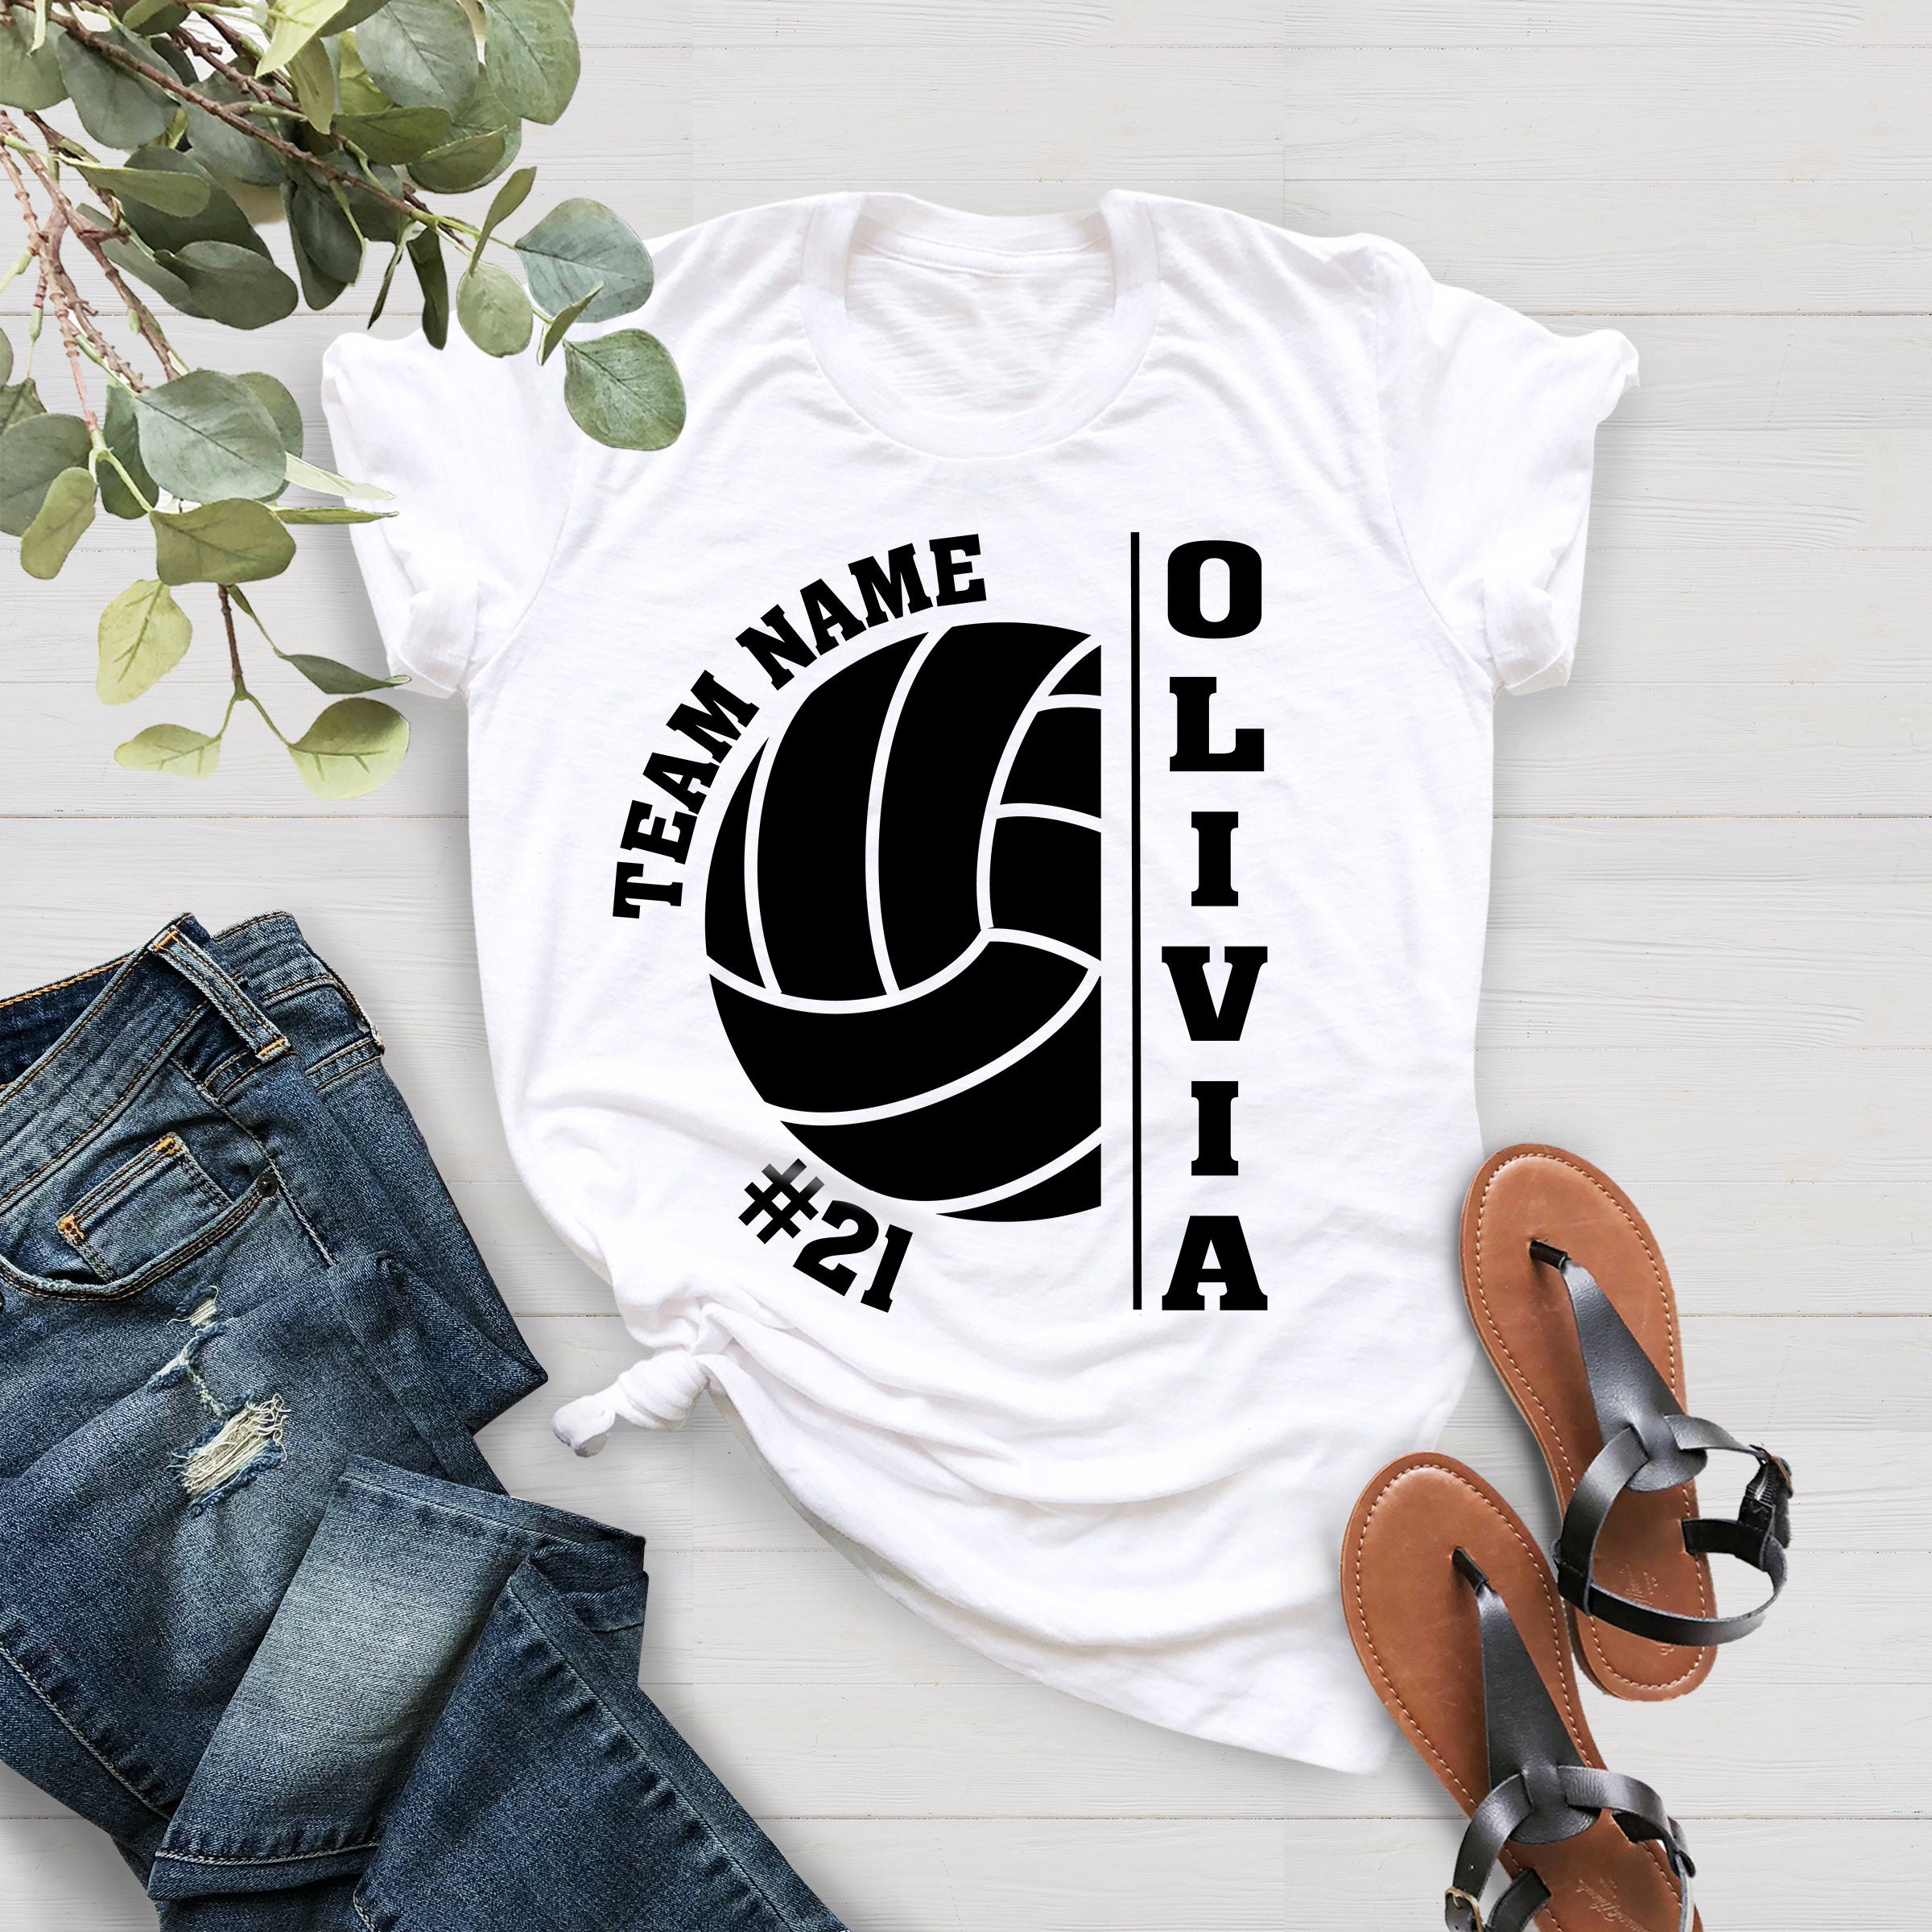 Personalized Volleyball Shirt, Custom Volleyball Shirts, Unisex Fit, Volleyball Mom Shirt, Team Spirit Shirt, Player Number and Name Shirt